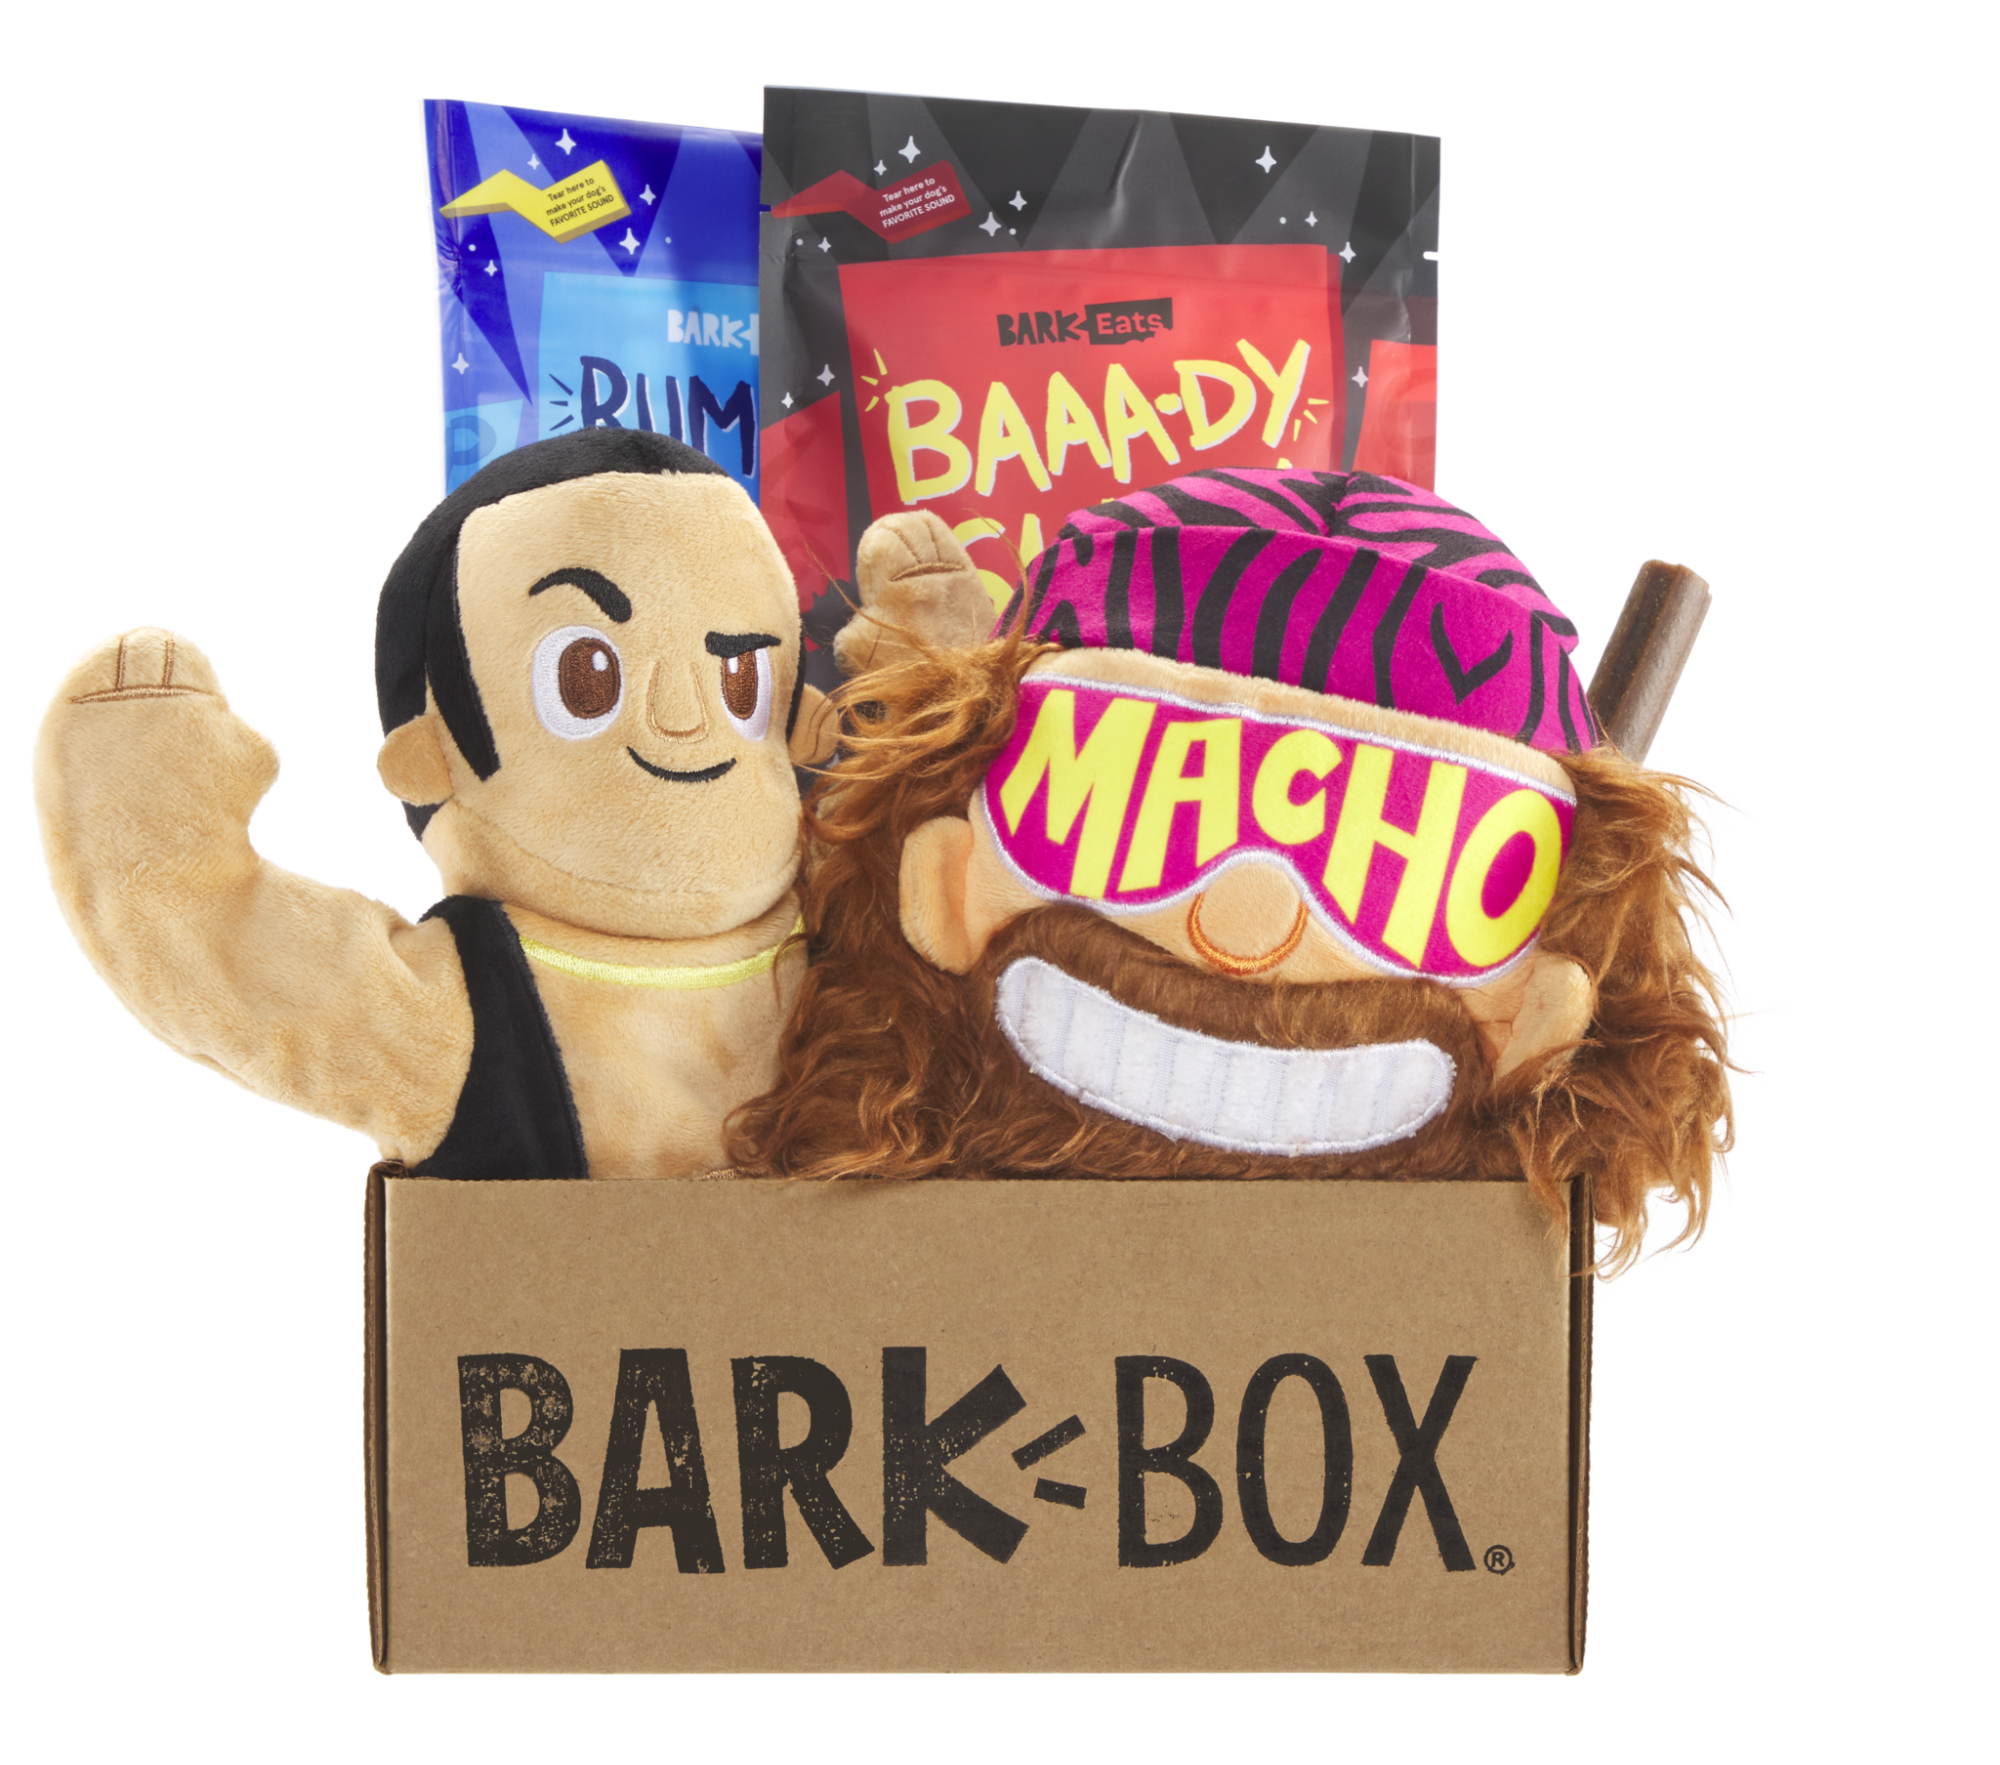 BarkBox & WWE Partner To Tag Team a Squeaker Smackdown Inside Limited-Edition Box